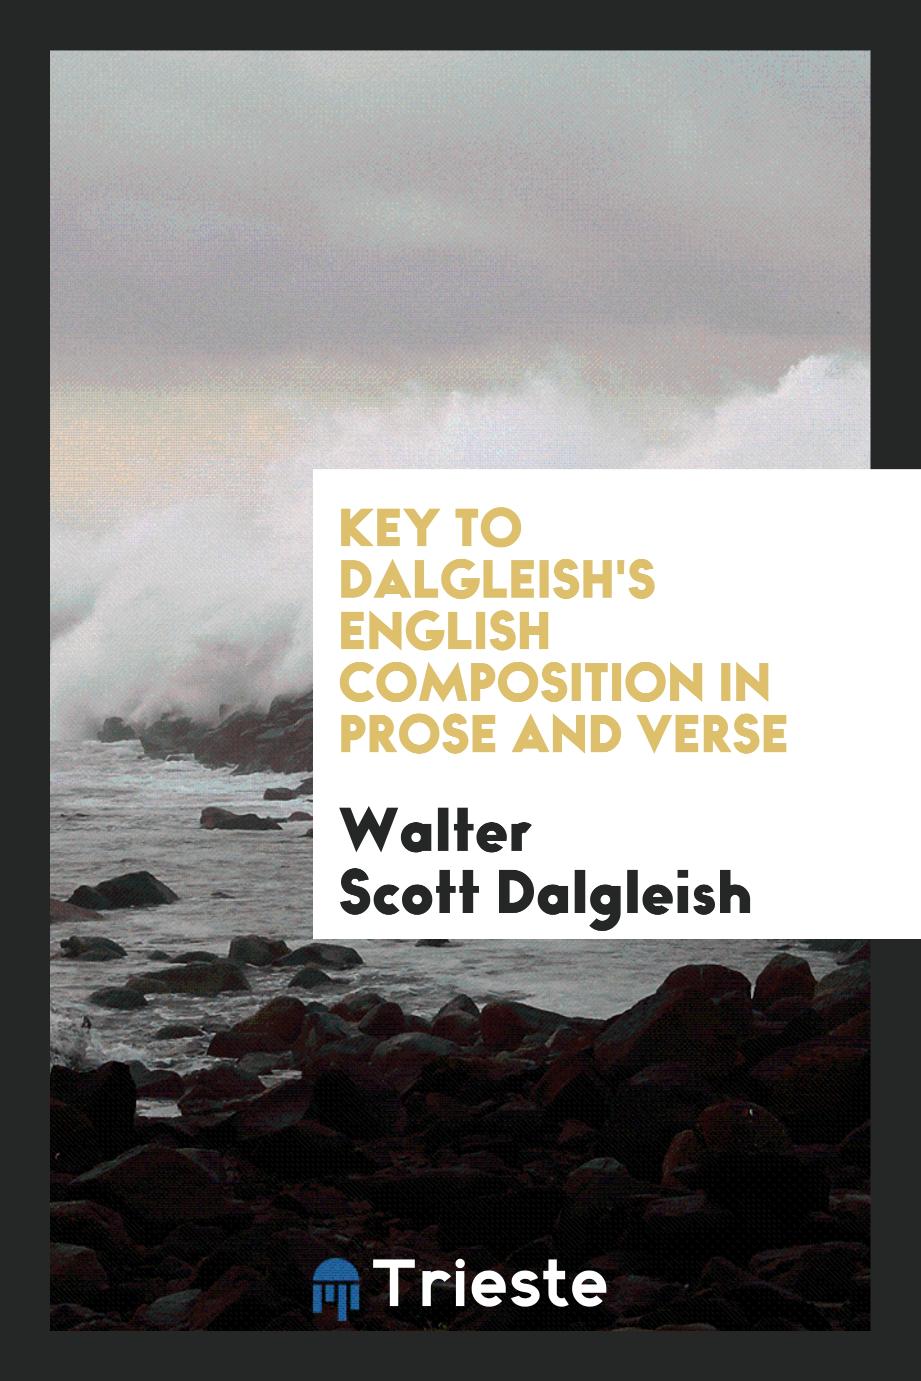 Key to dalgleish's english composition in prose and verse